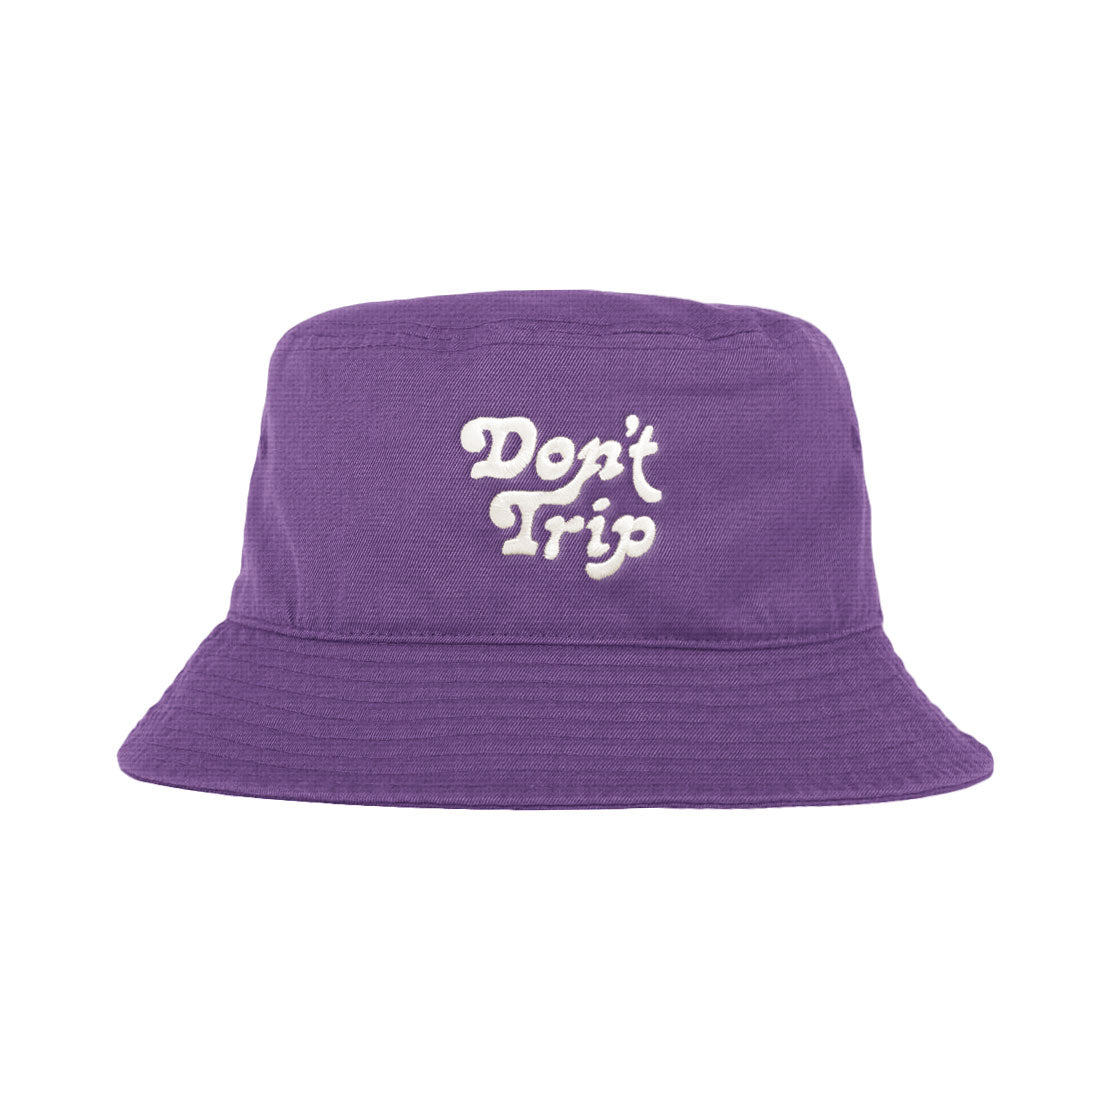 Free & Easy Don't Trip Canvas Bucket Hat in purple with white Don't Trip embroidery on a white background - Free & Easy